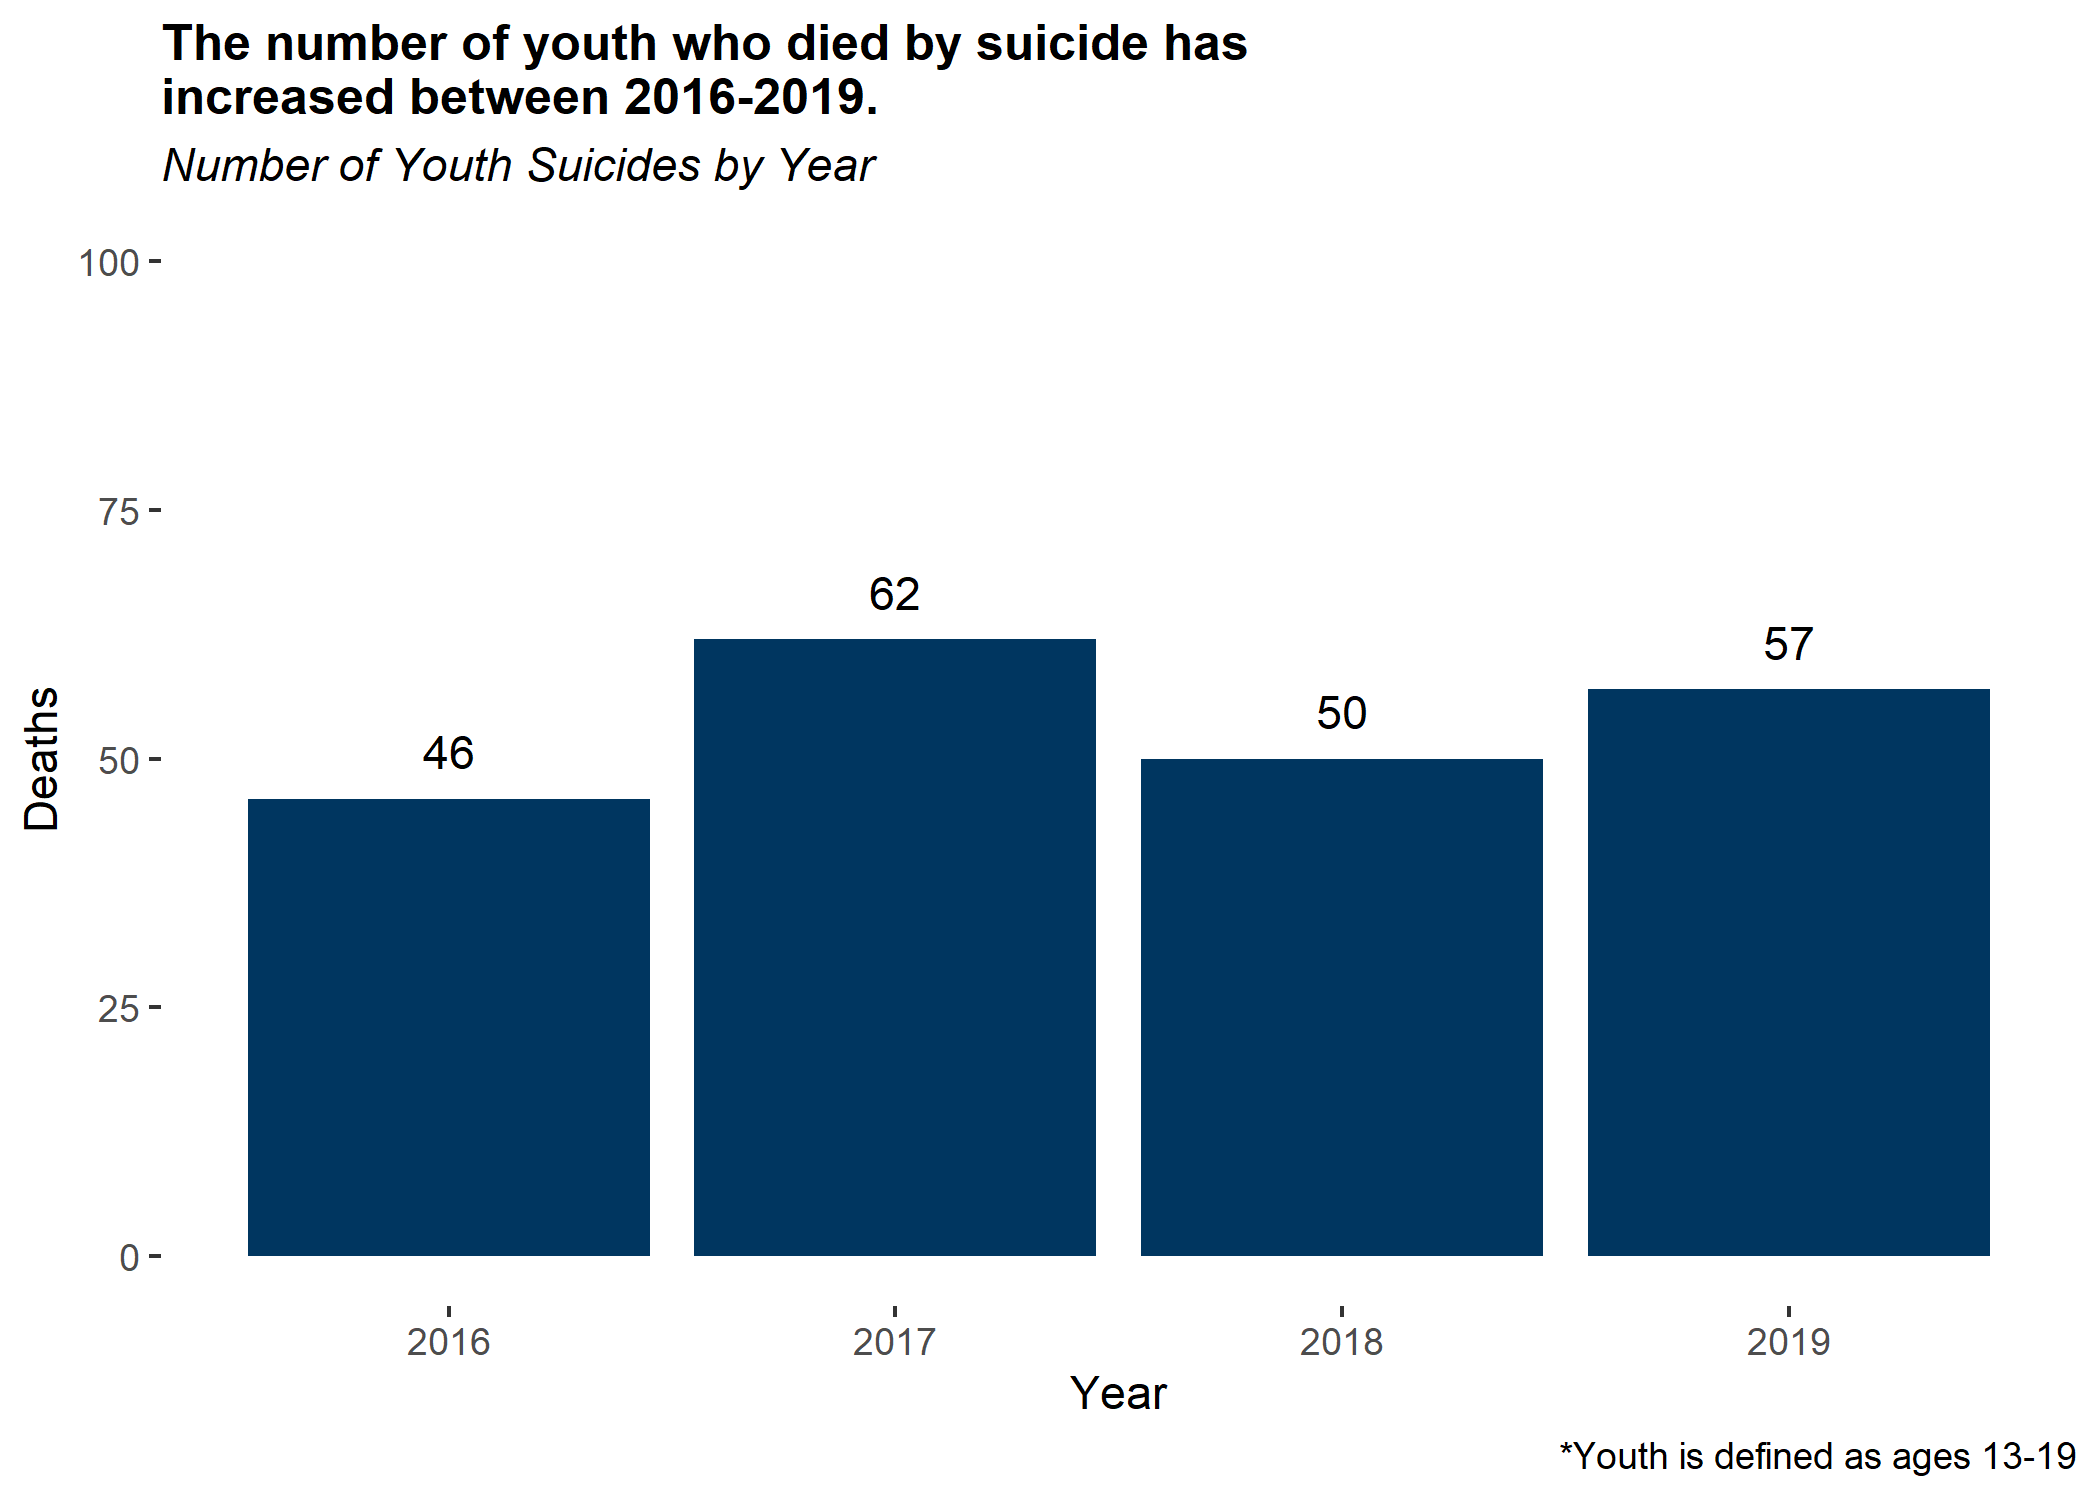 Number of youth who died by suicide has increased between 2016 and 2019.